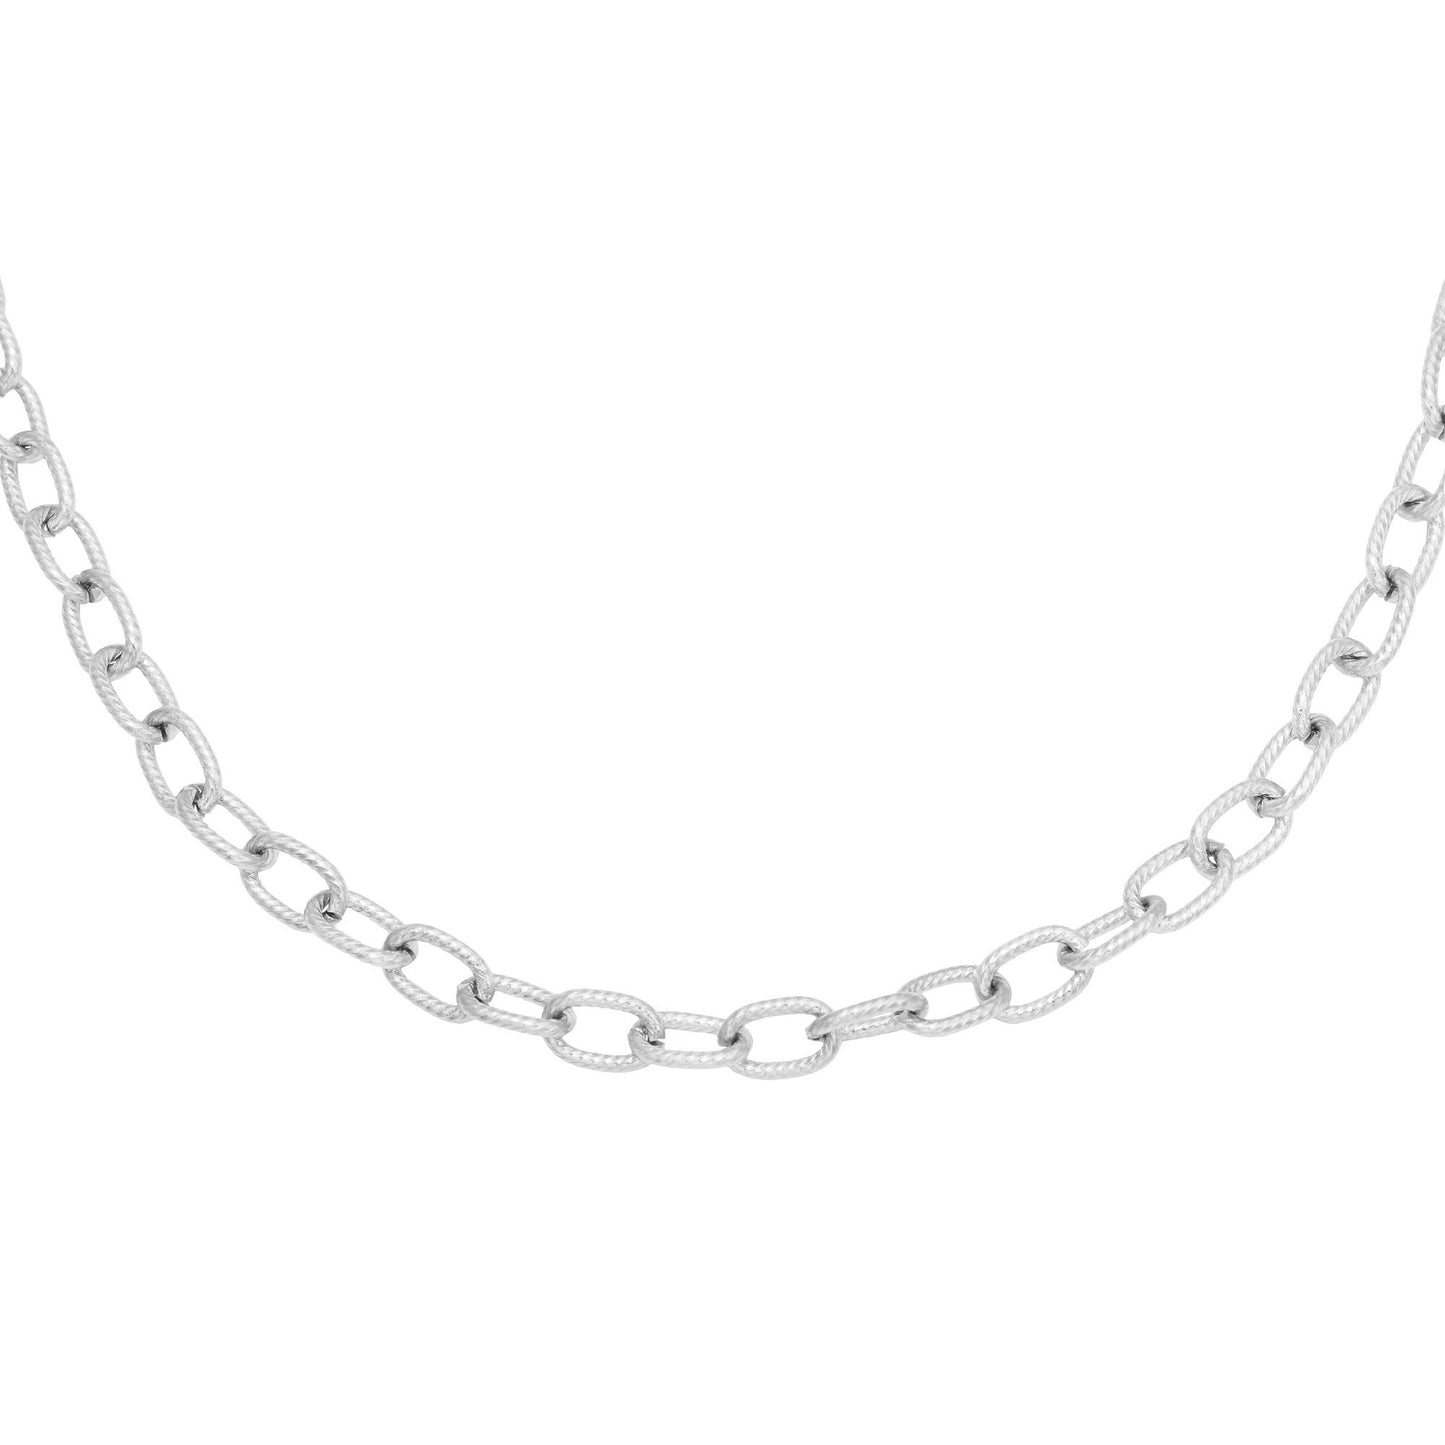 Chisled Chain Necklace Silver